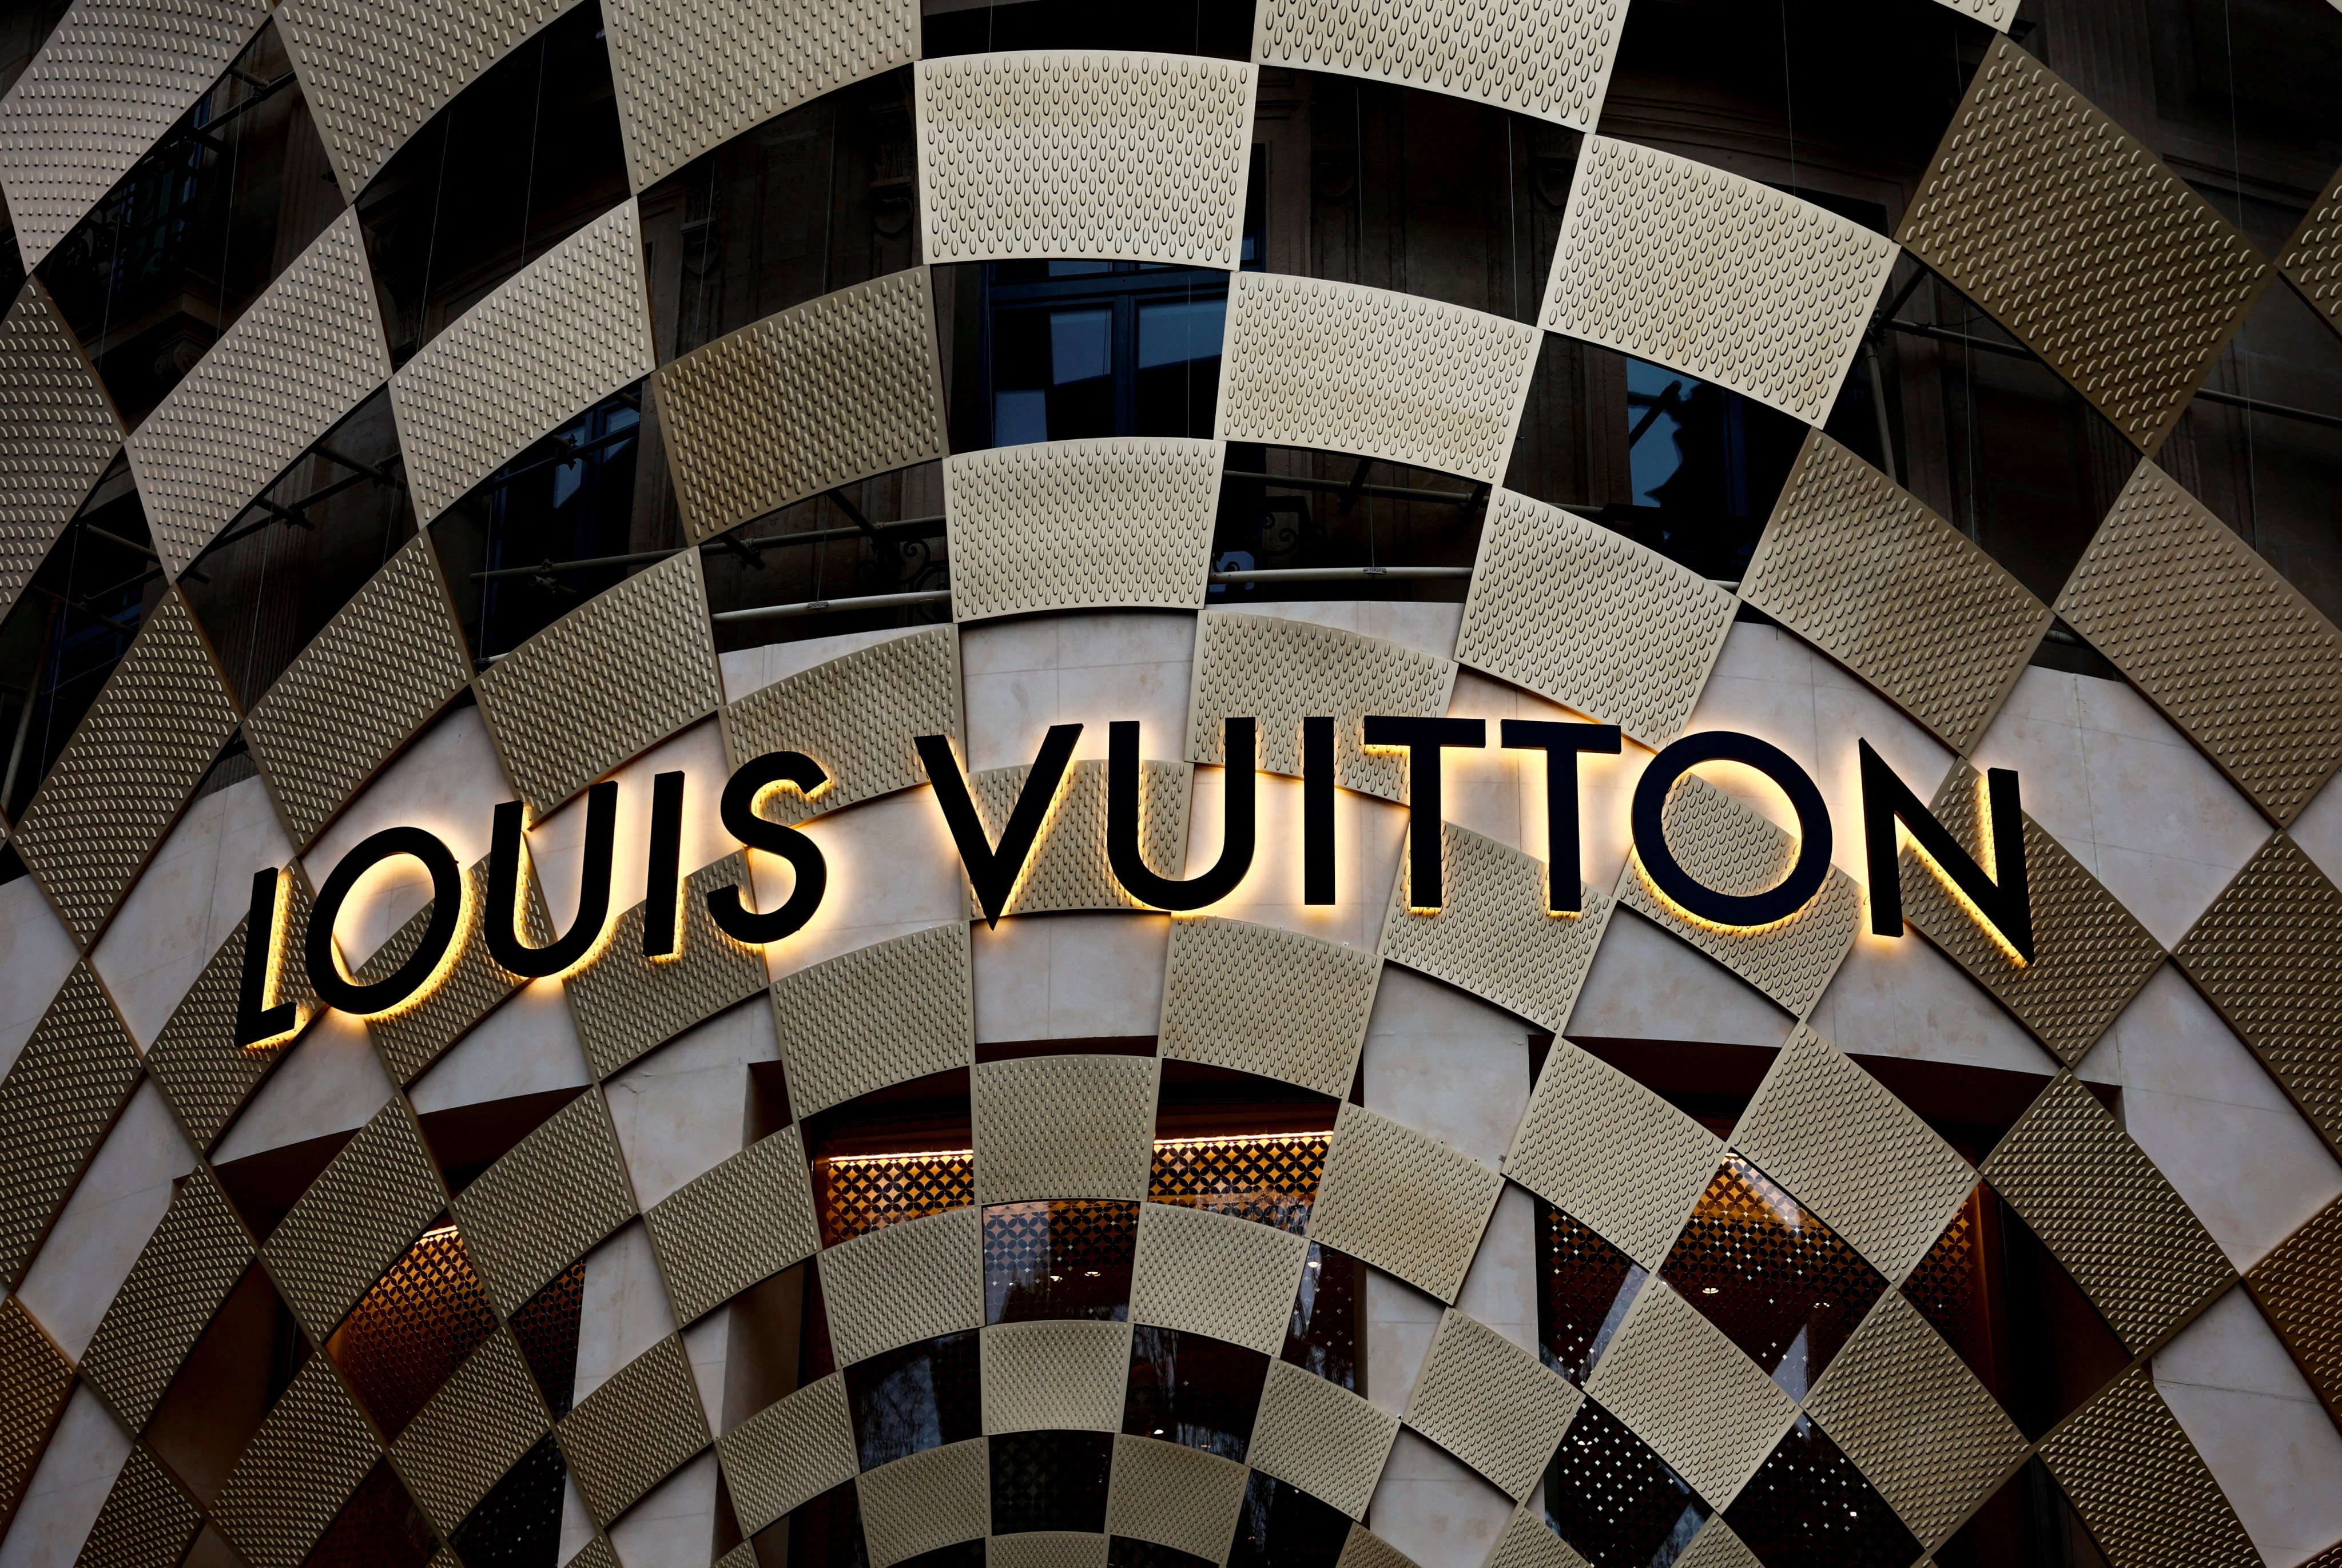 Louis Vuitton is one of the dozens of luxury brands in LVMH’s stable. Photo: Reuters